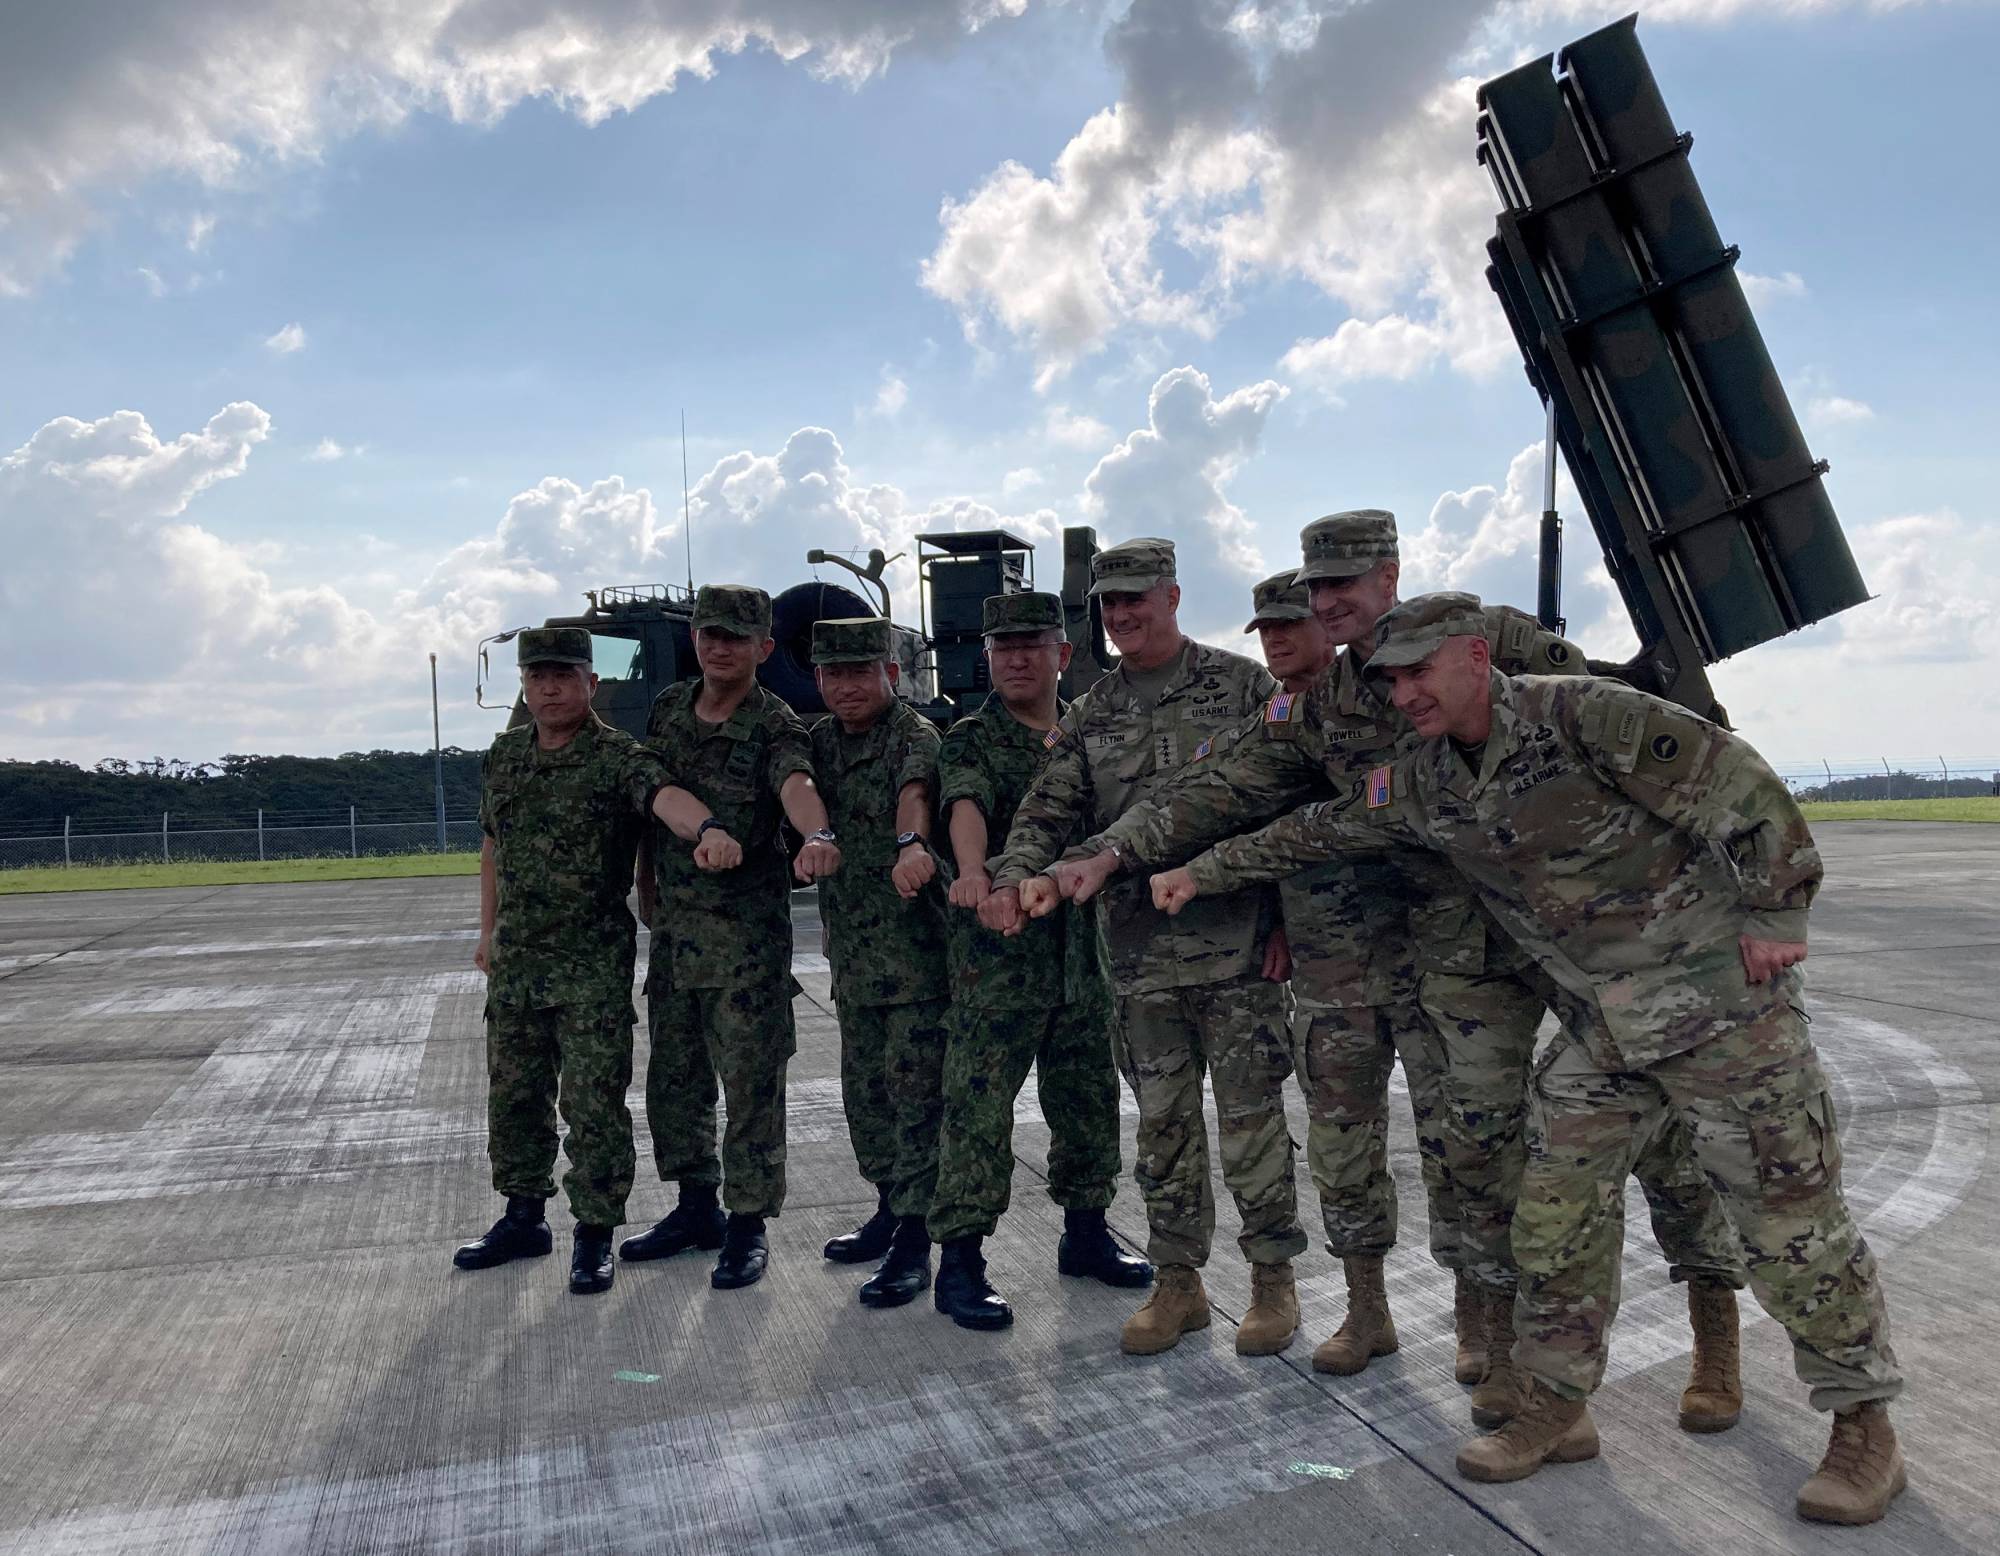 U.S. Army Pacific chief Gen. Charles Flynn (fourth from right) poses with Gen. Yoshida Yoshihide (fourth from left), Ground Self-Defense Force chief of staff, and other officers at a Ground Self-Defense Force base on Amami Oshima island, Kagoshima Prefecture, on Thursday. | REUTERS